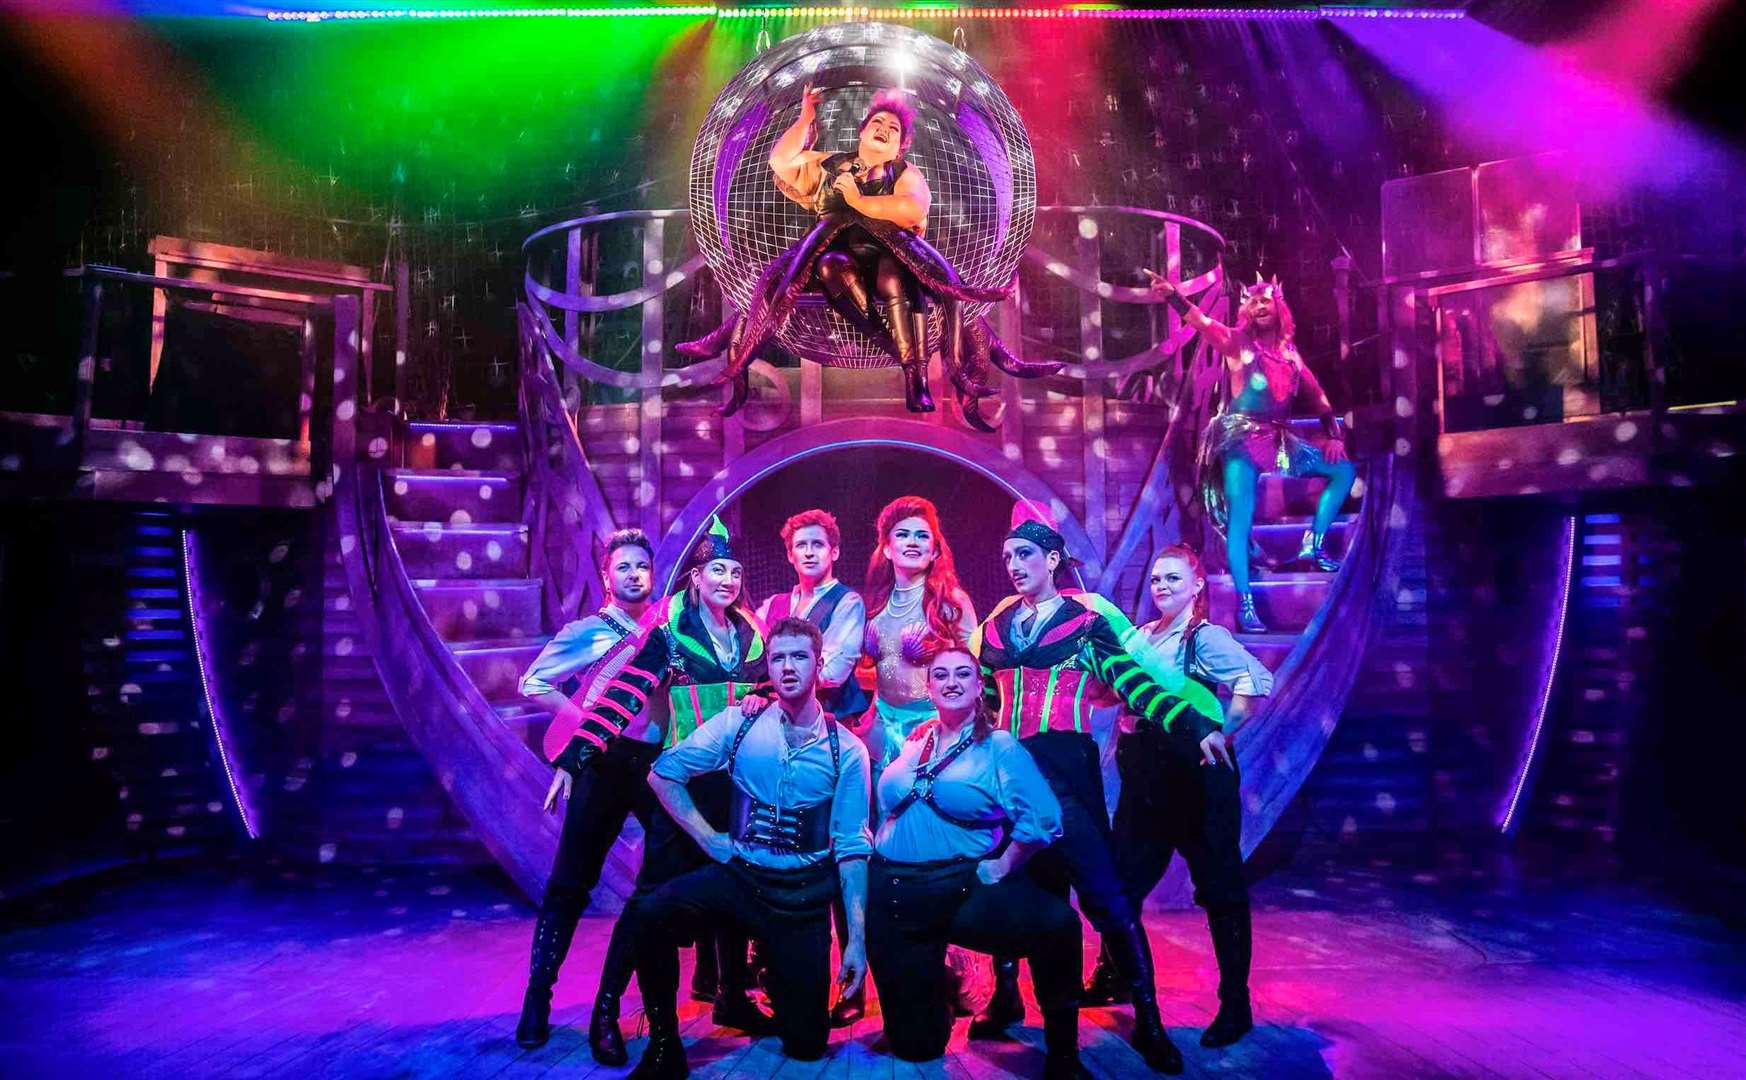 Kent-based drag artist River Medway stars as Ariel in the new musical parody Unfortunate: The Untold Story of Ursula the Sea Witch. Picture: Supplied by Distrikt London